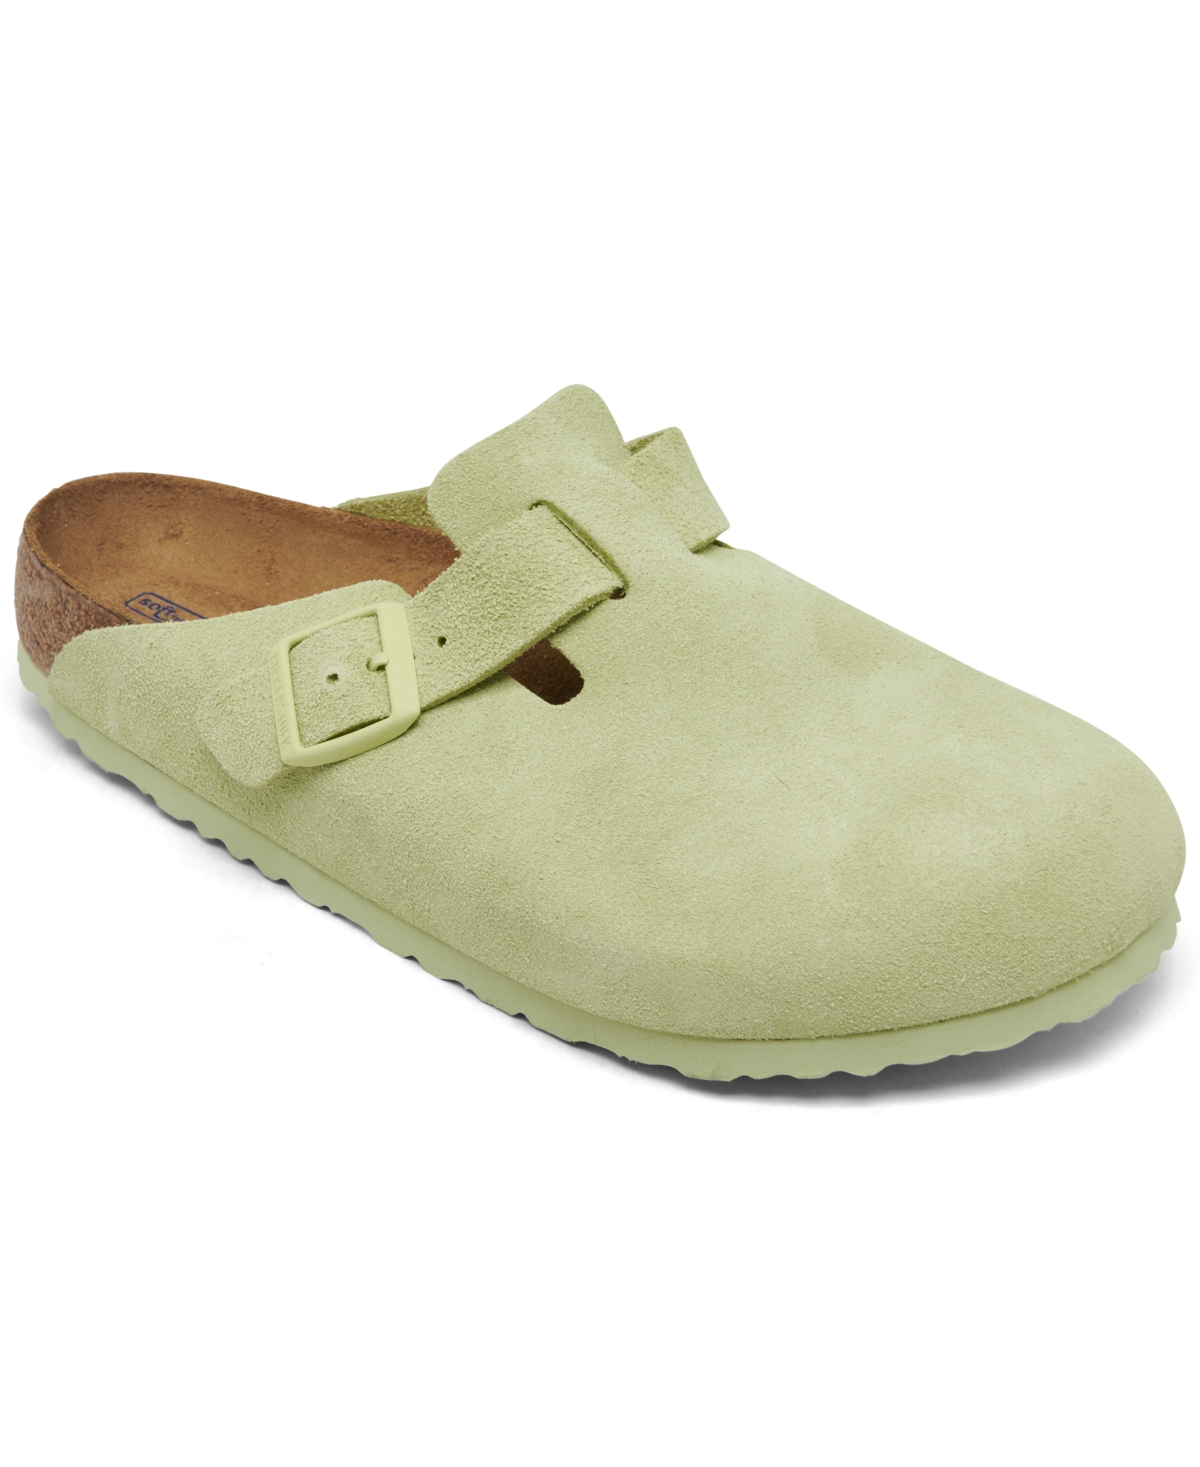 Shop Birkenstock Men's Boston Soft Footbed Suede Leather Clogs From Finish Line In Green